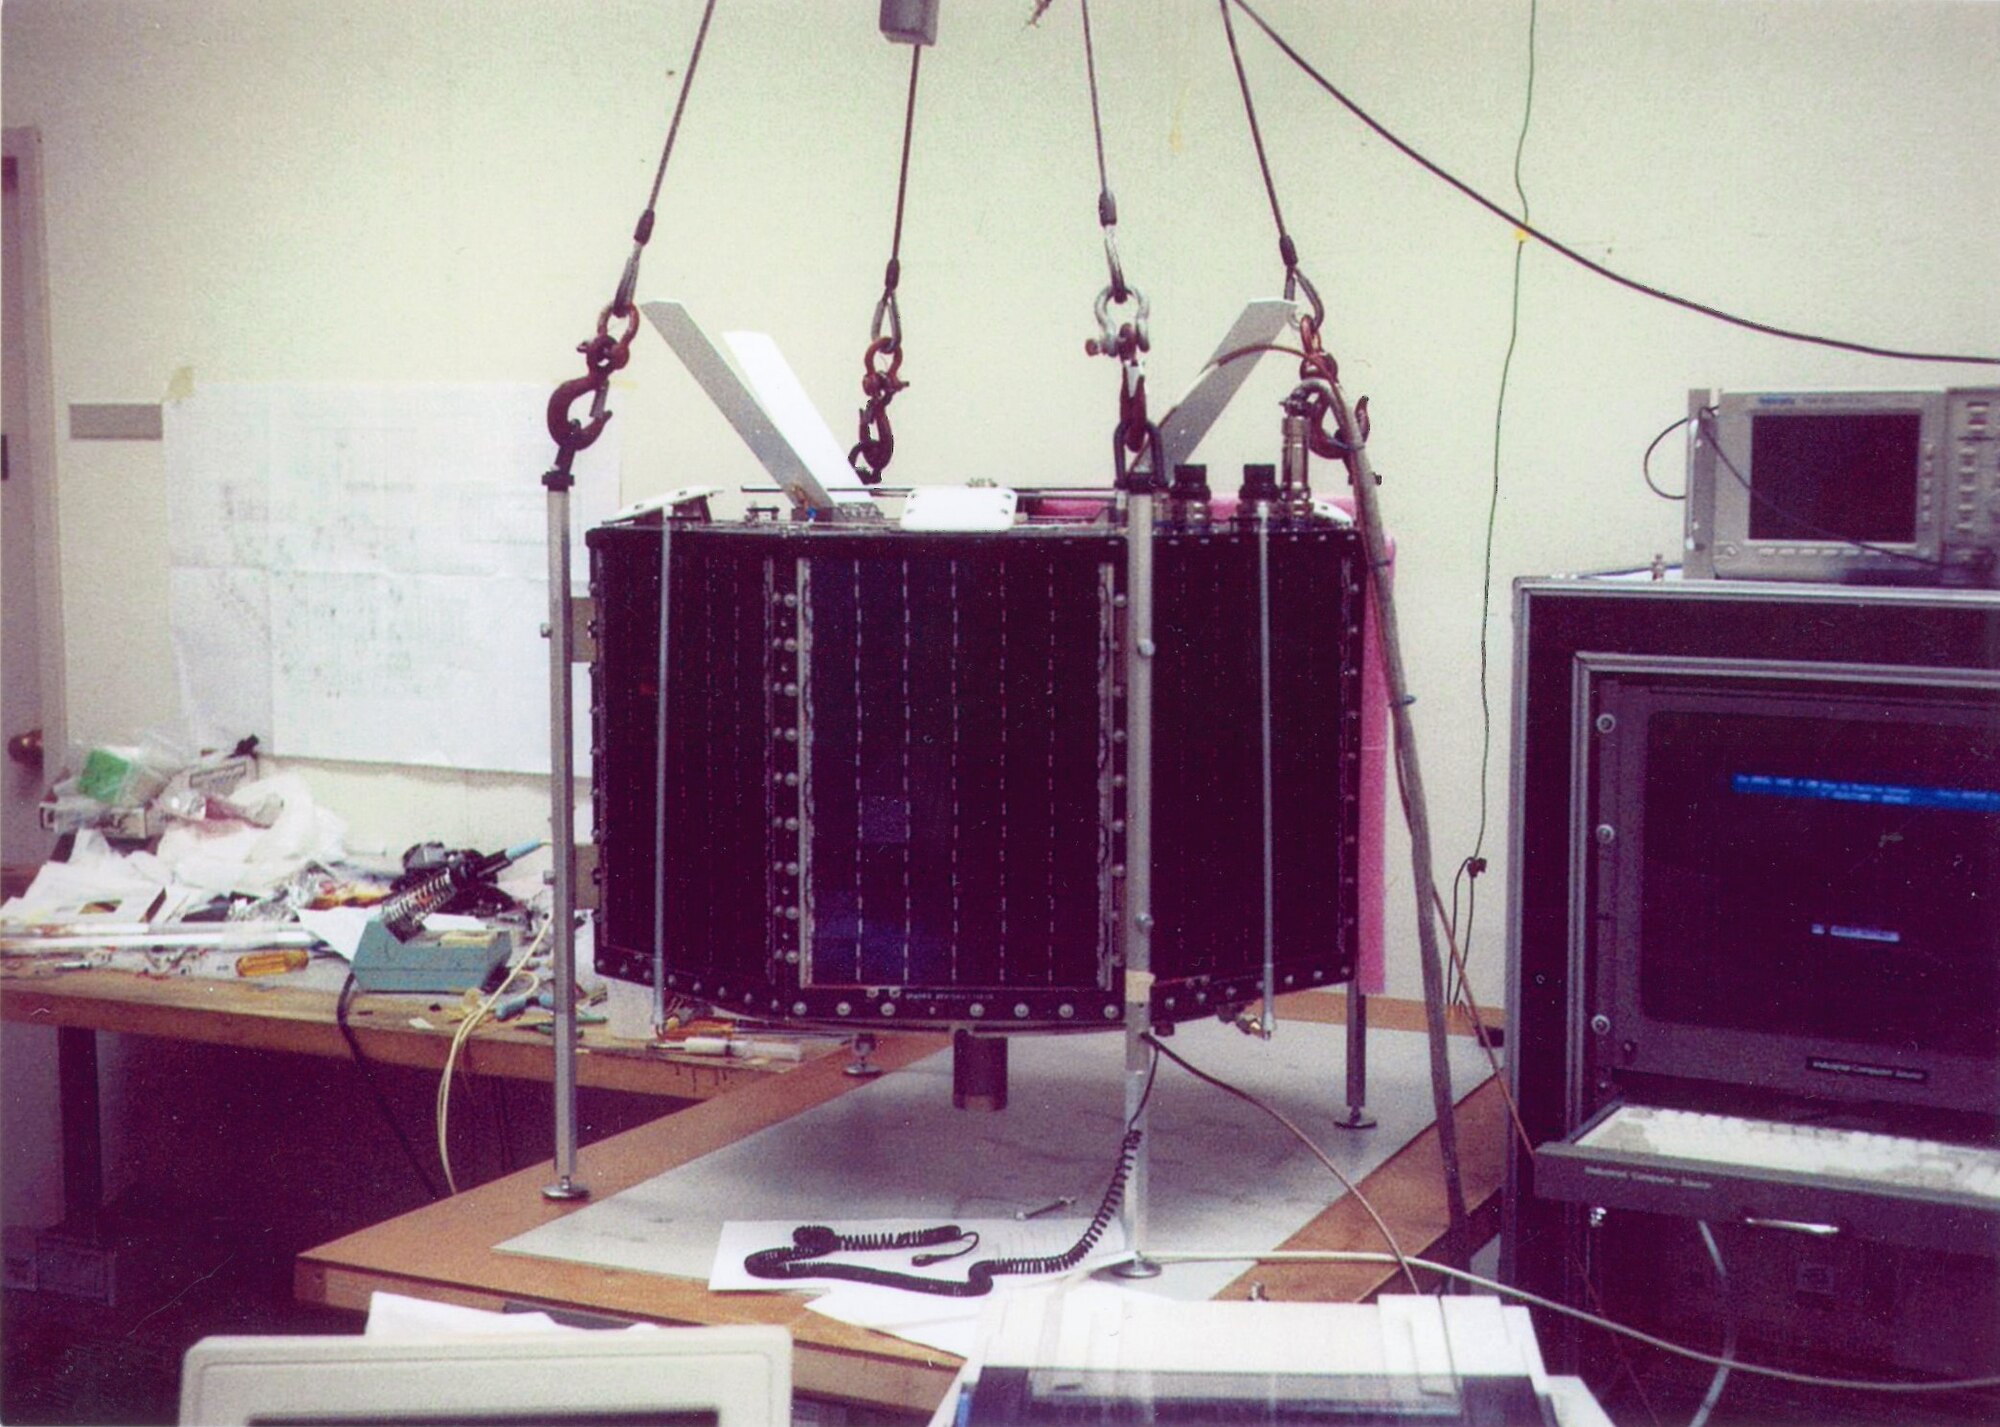 After Radar Calibration satellite's initial launch June 25, 1993, at Vandenberg Air Force Base, Calif., it remained operational for nearly 20 years until its last valid communication came in May.  It was expected to have a three-year lifecycle. (Courtesy photo)
